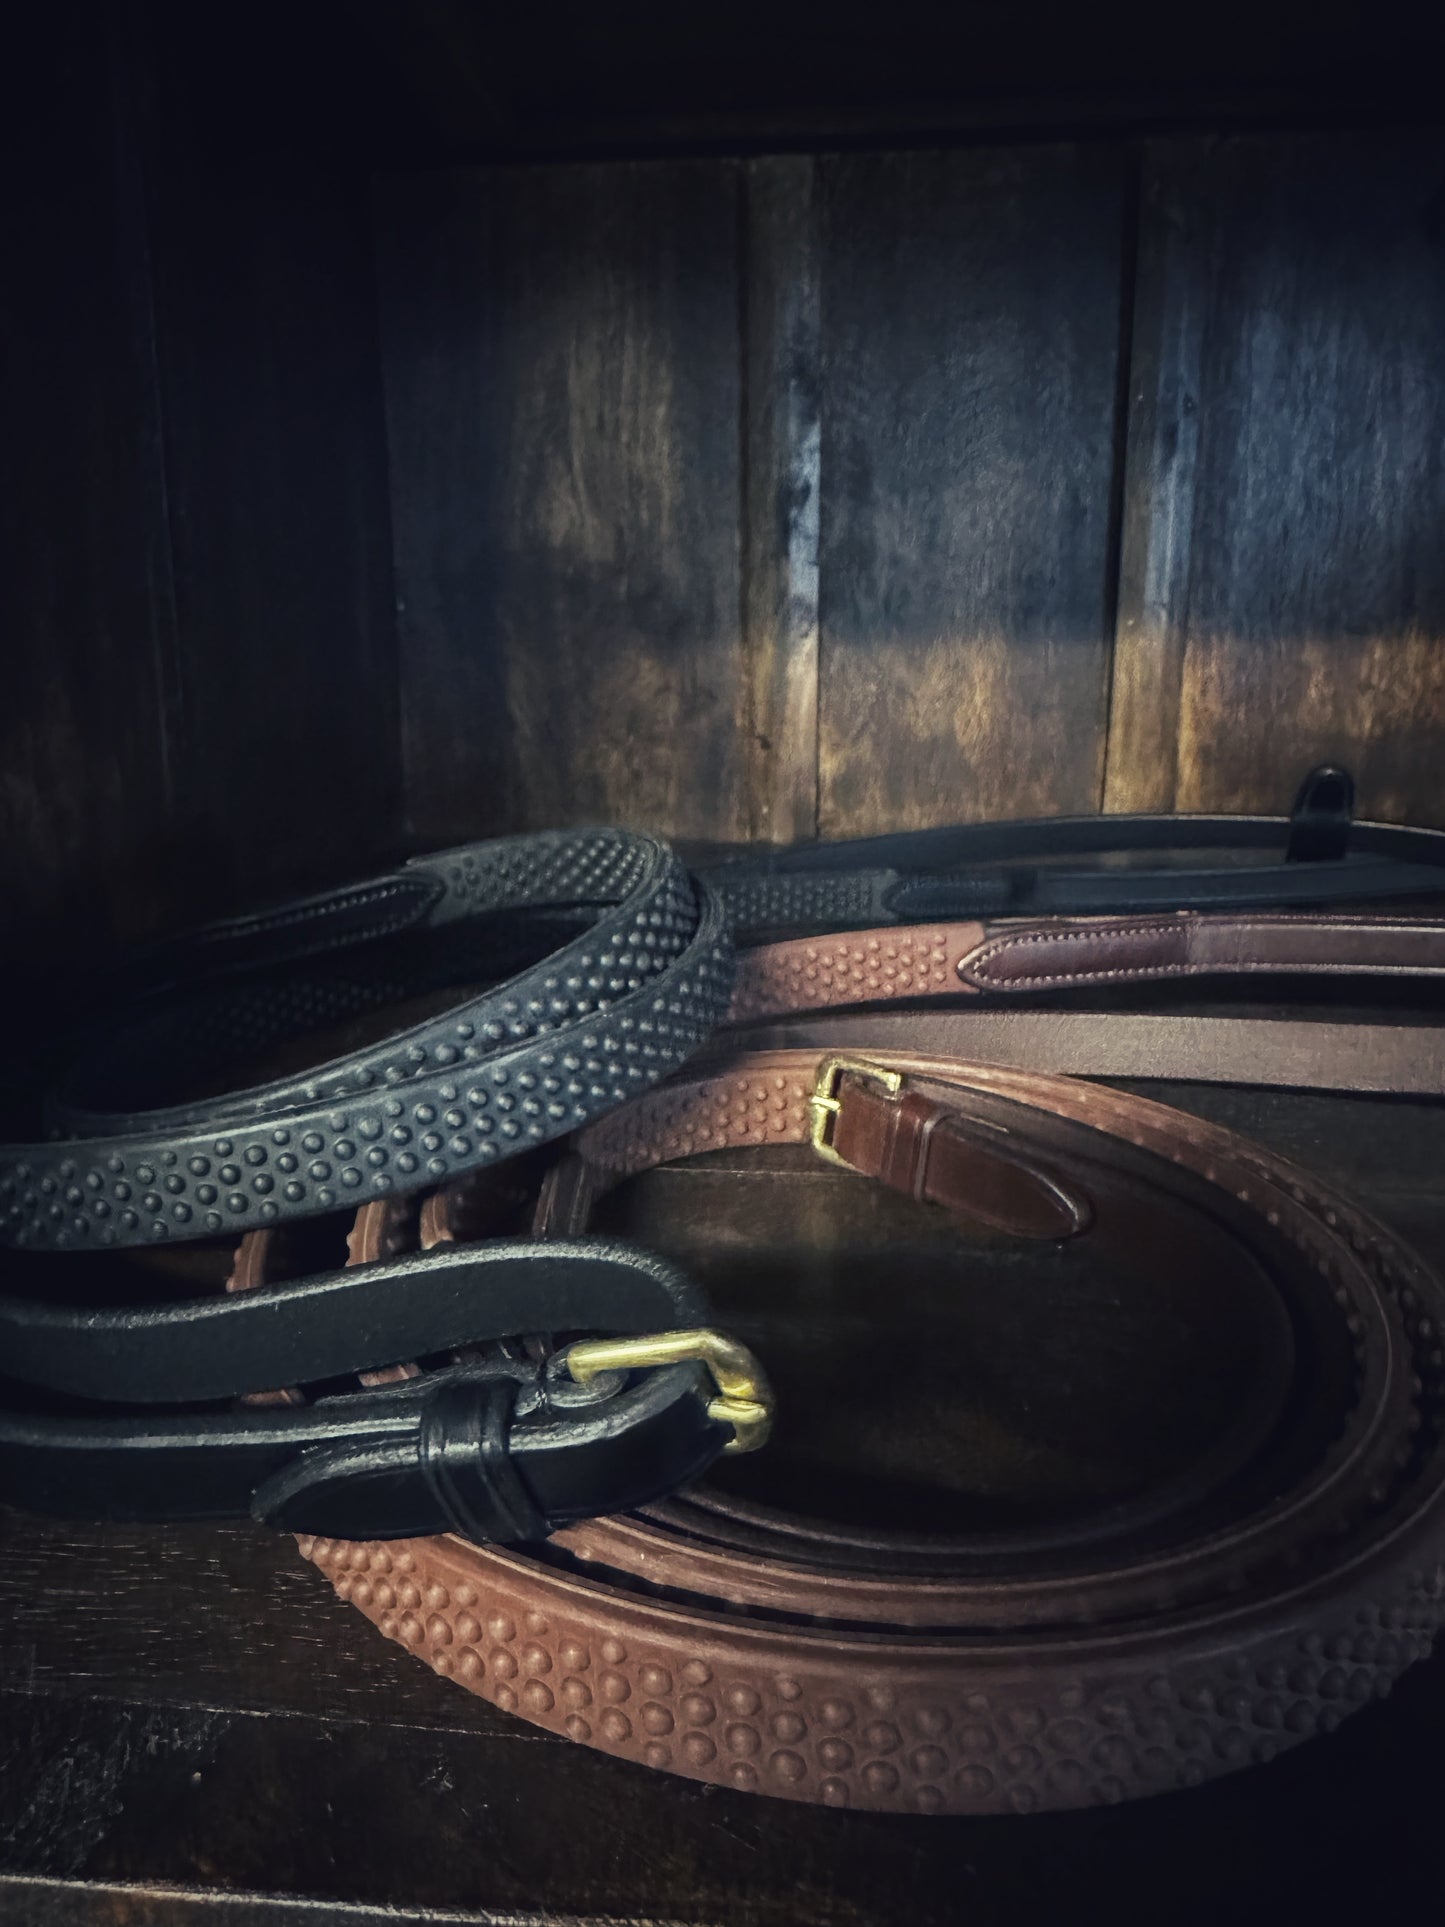 Rubber reins with brass details